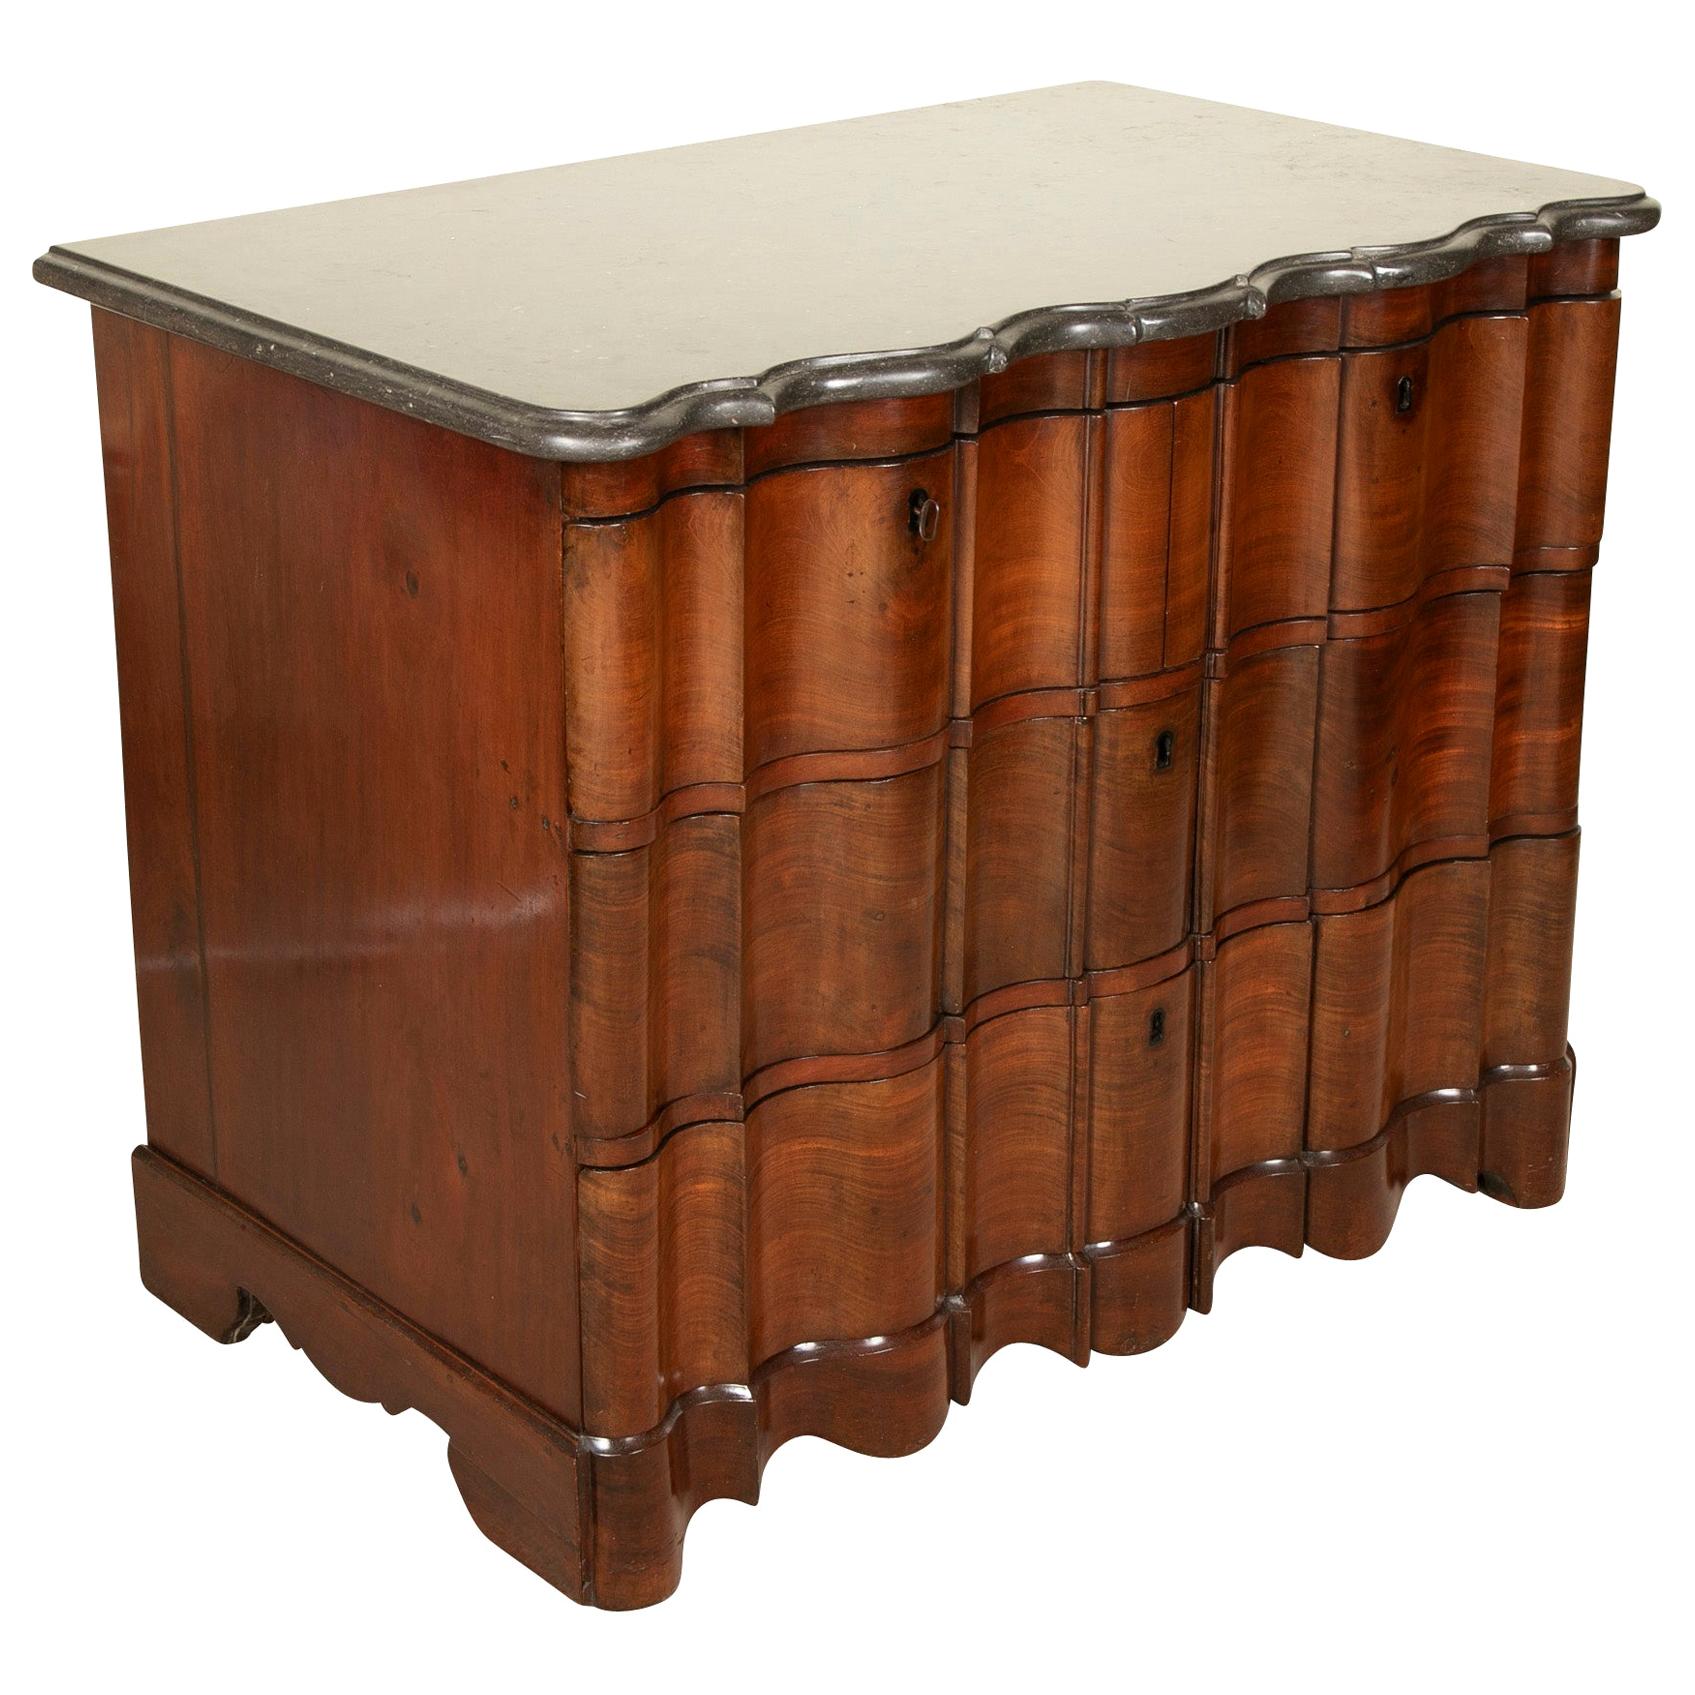 Handsome Baroque Four-Drawer Walnut Chest with Original Shaped Marble Top